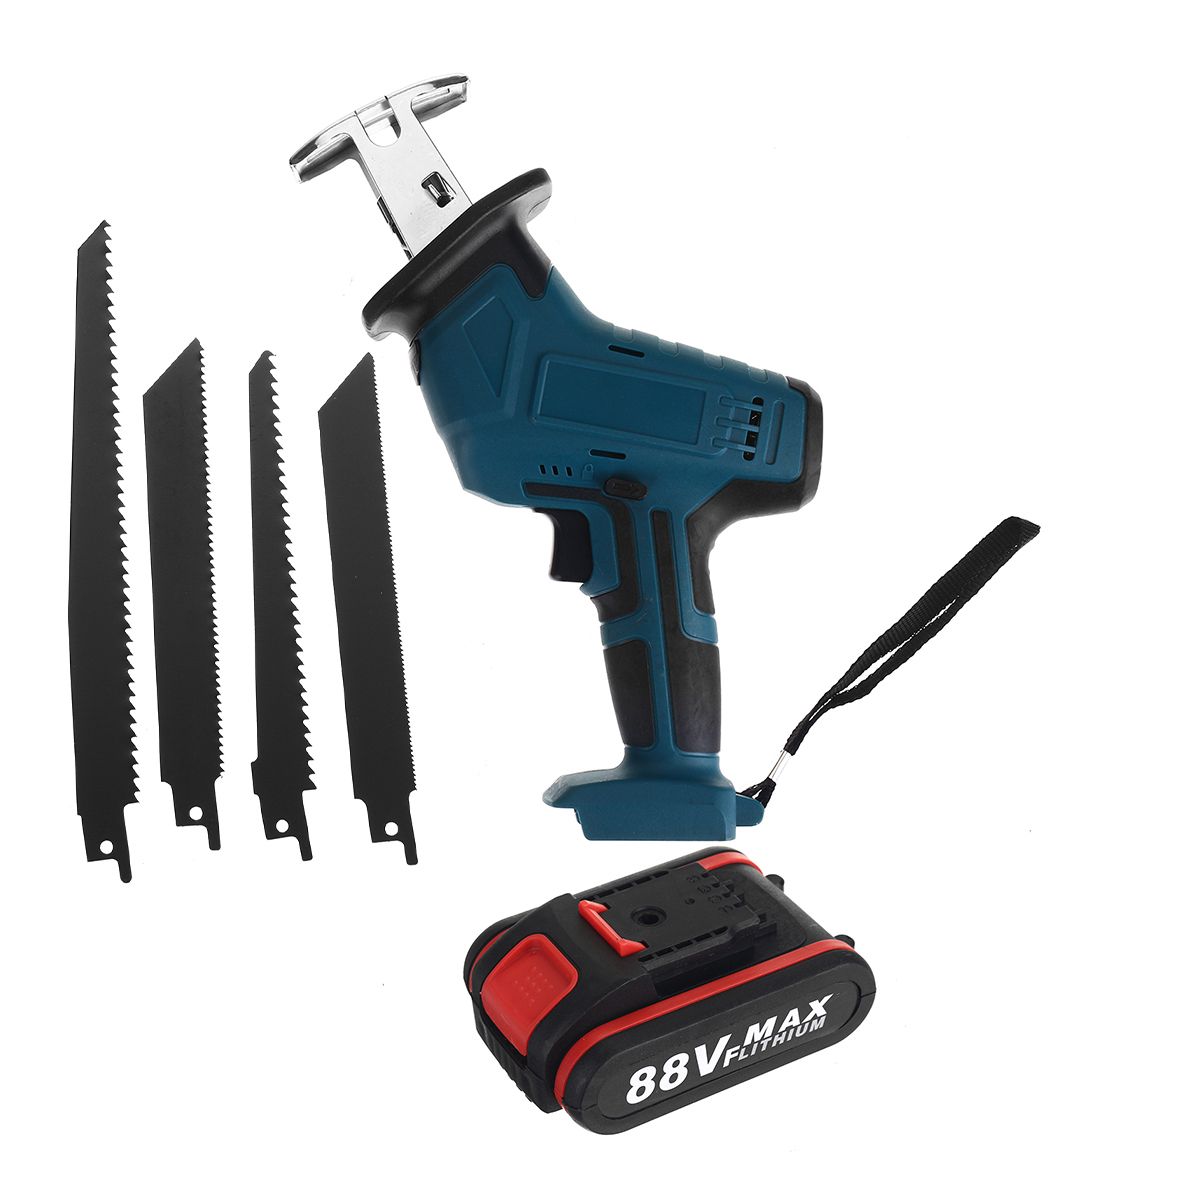 Cordless-Reciprocating-Saw-With-4-Blades-Rechargeable-Electric-Saw-for-Sawing-Branches-Metal-PVC-Woo-1684064